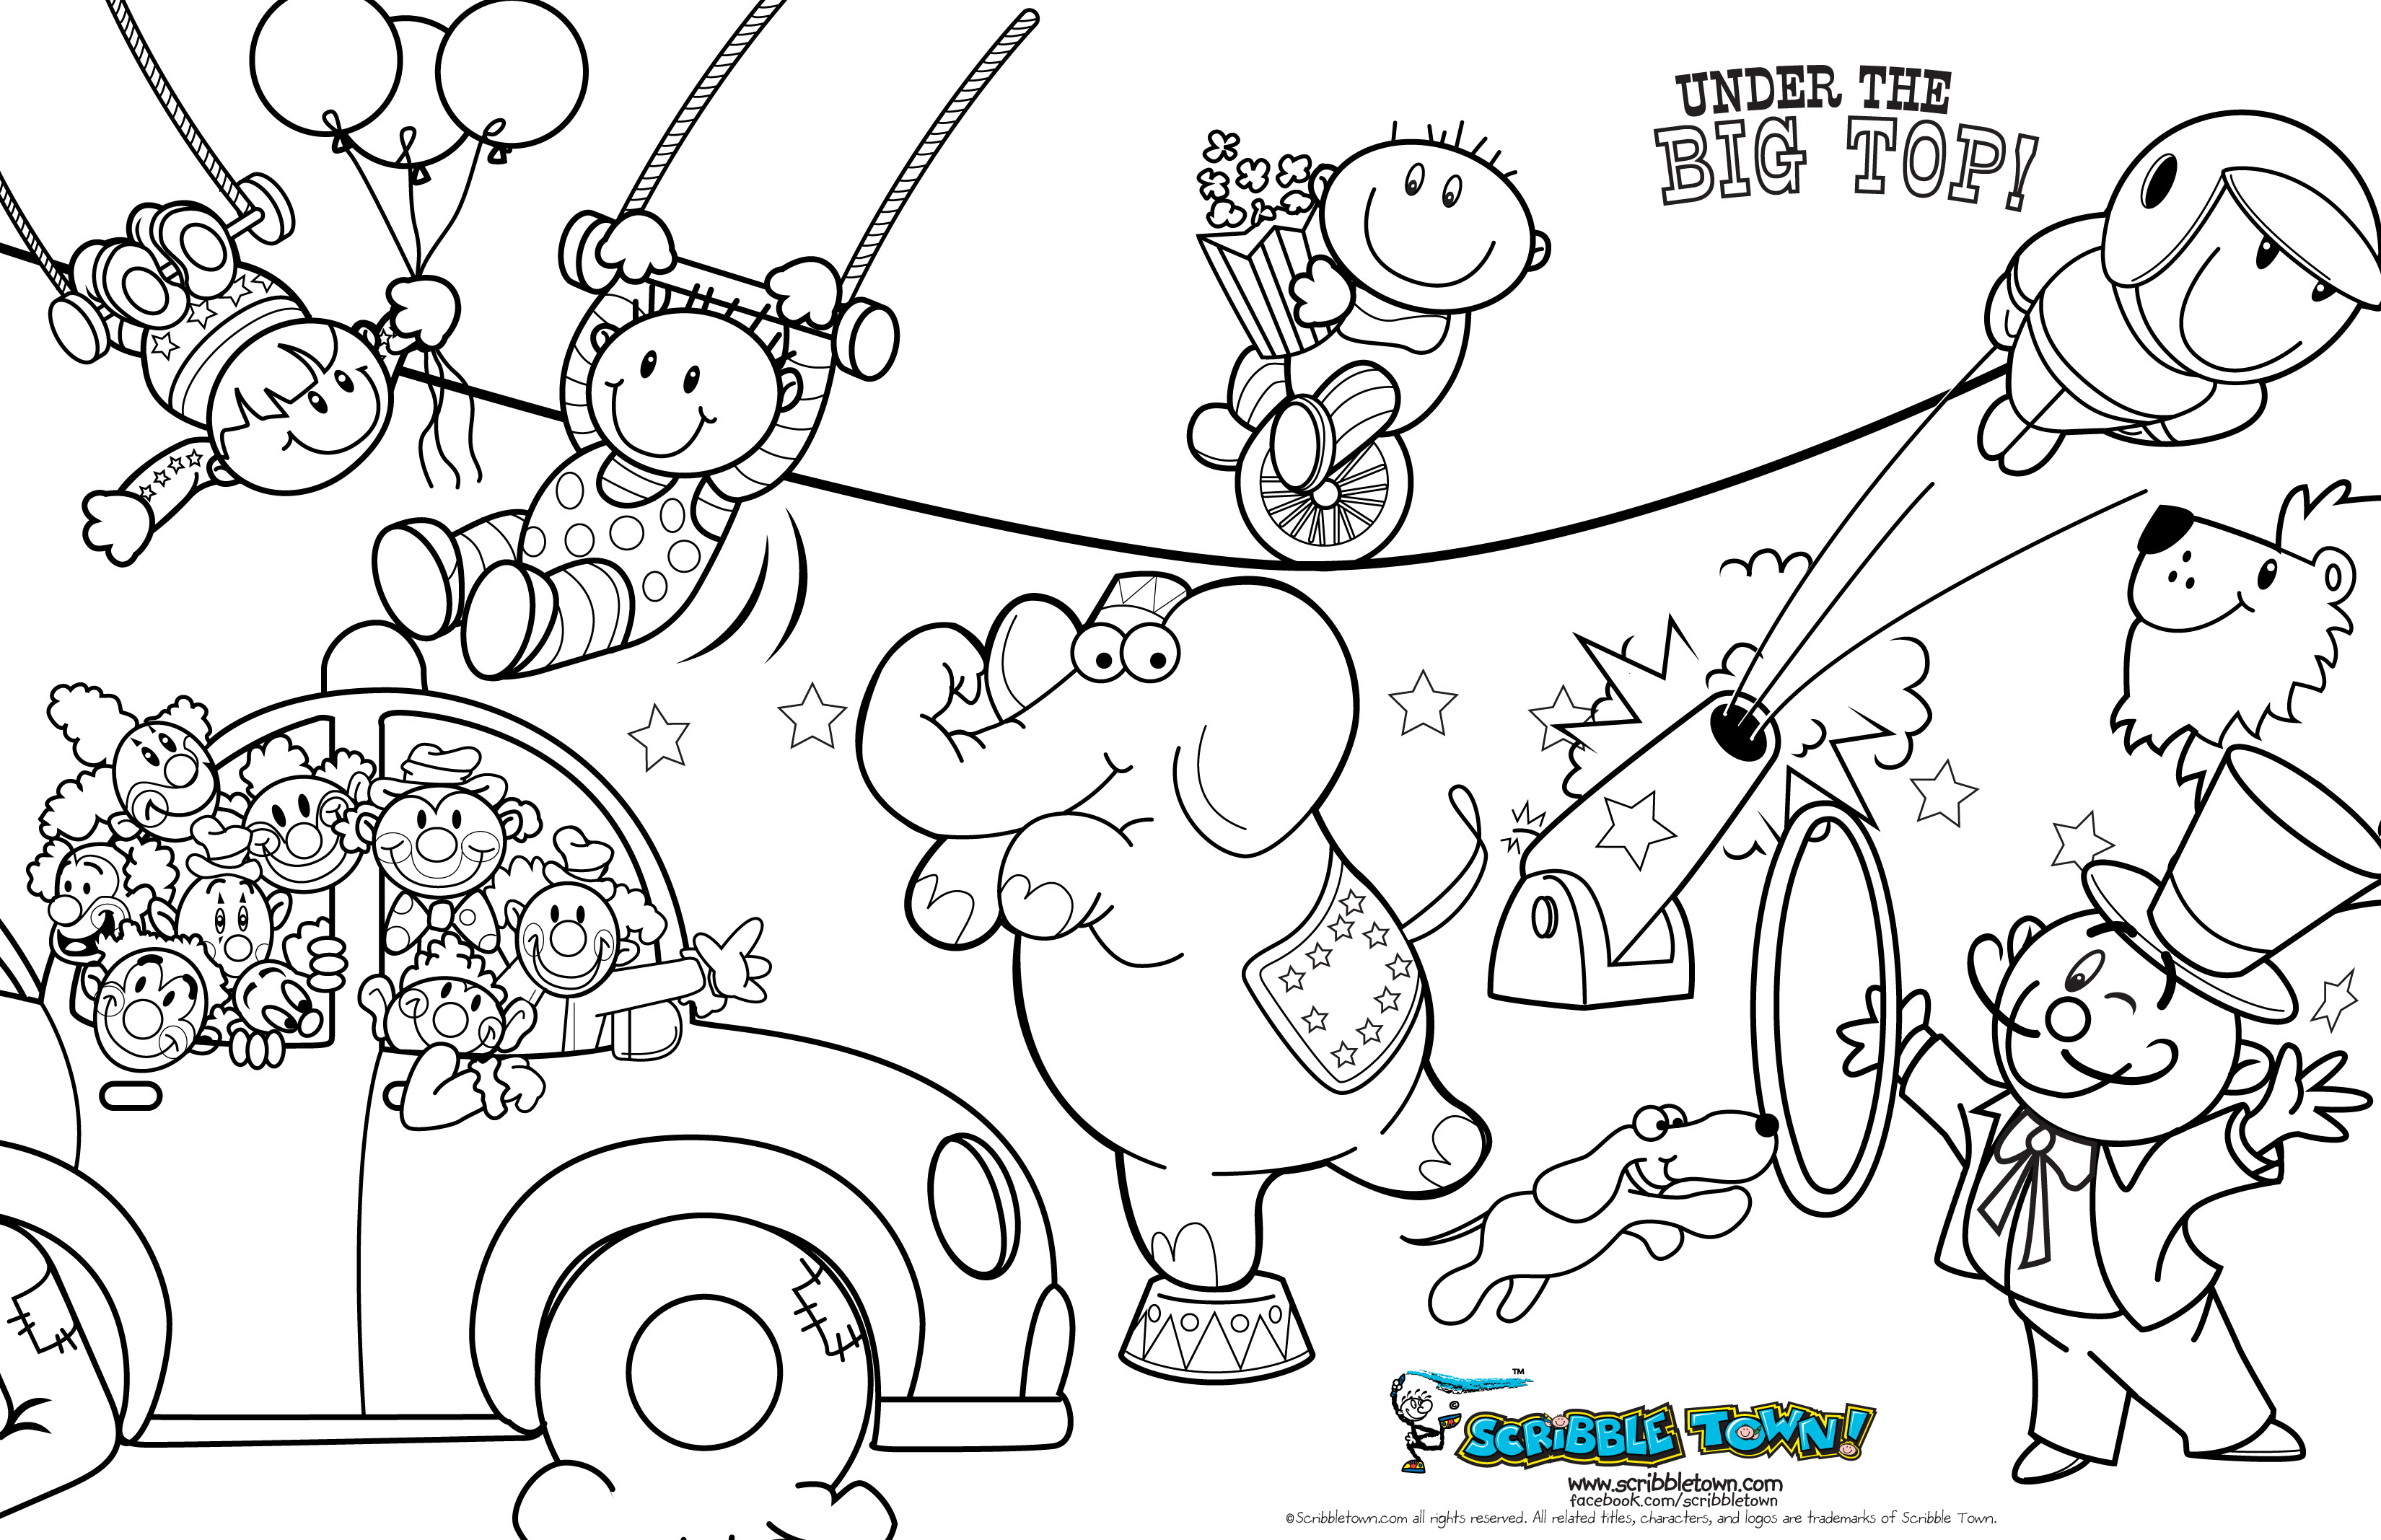 Carnival Coloring Sheets For Kids
 CIRCUS COLORING PAGES